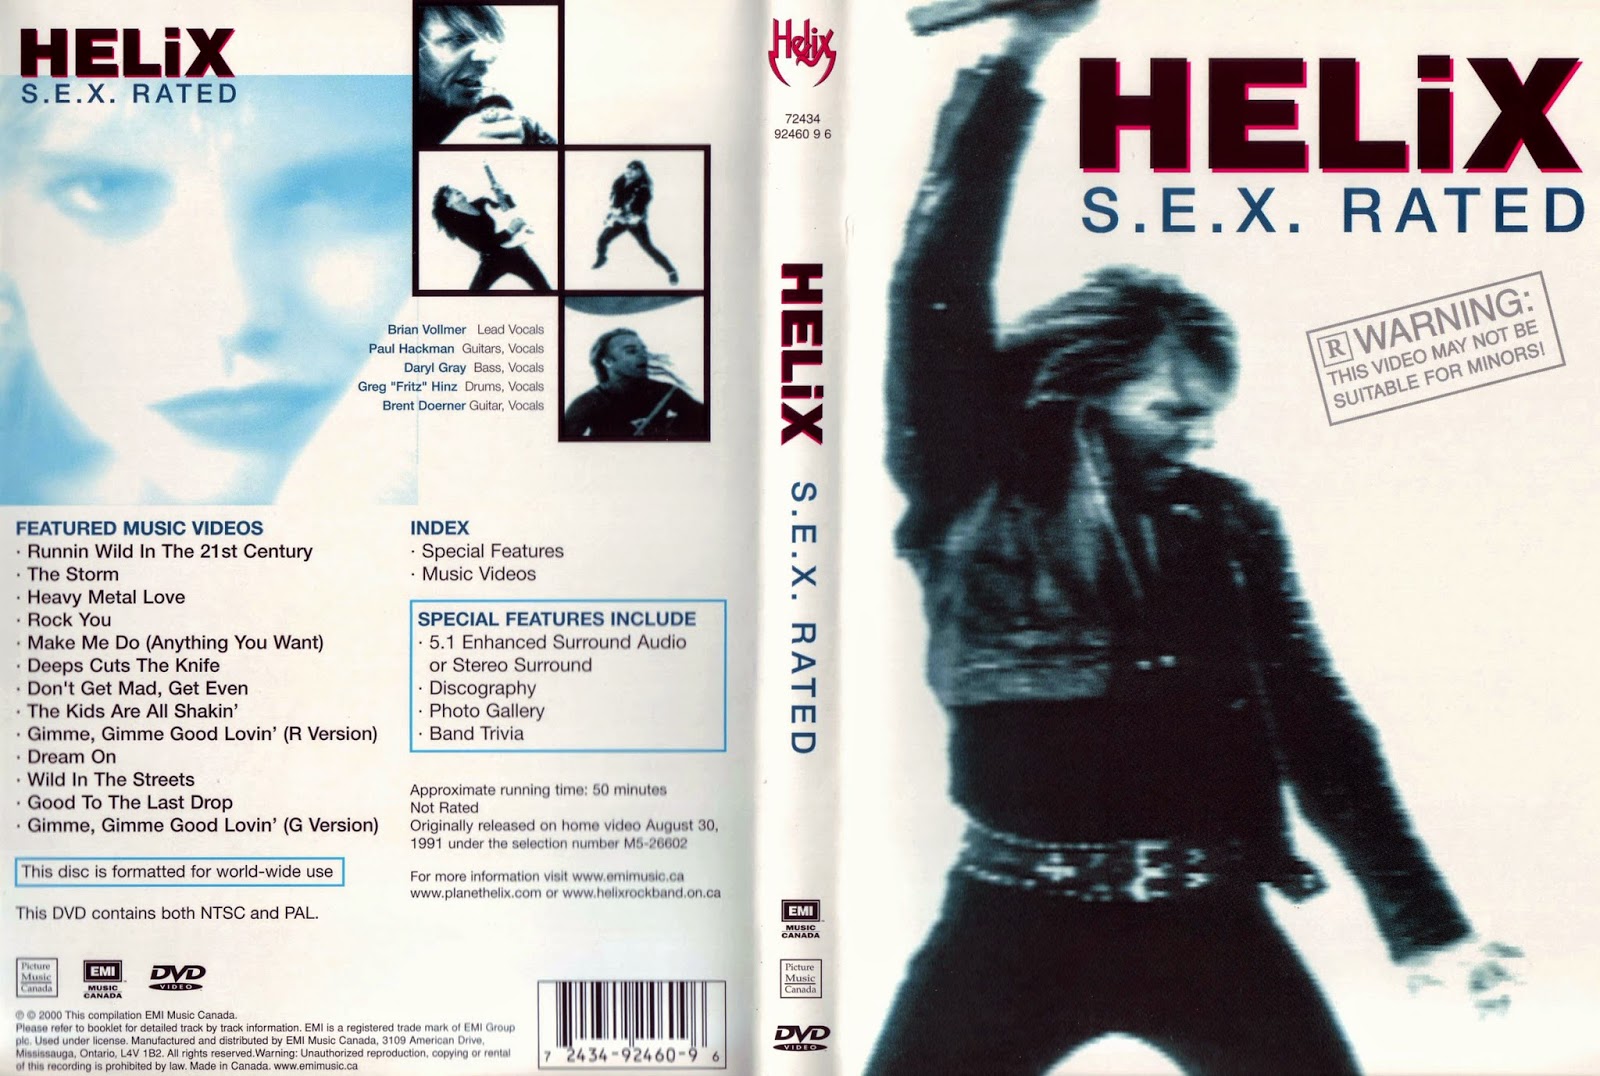 Helix - S.E.X. Rated.